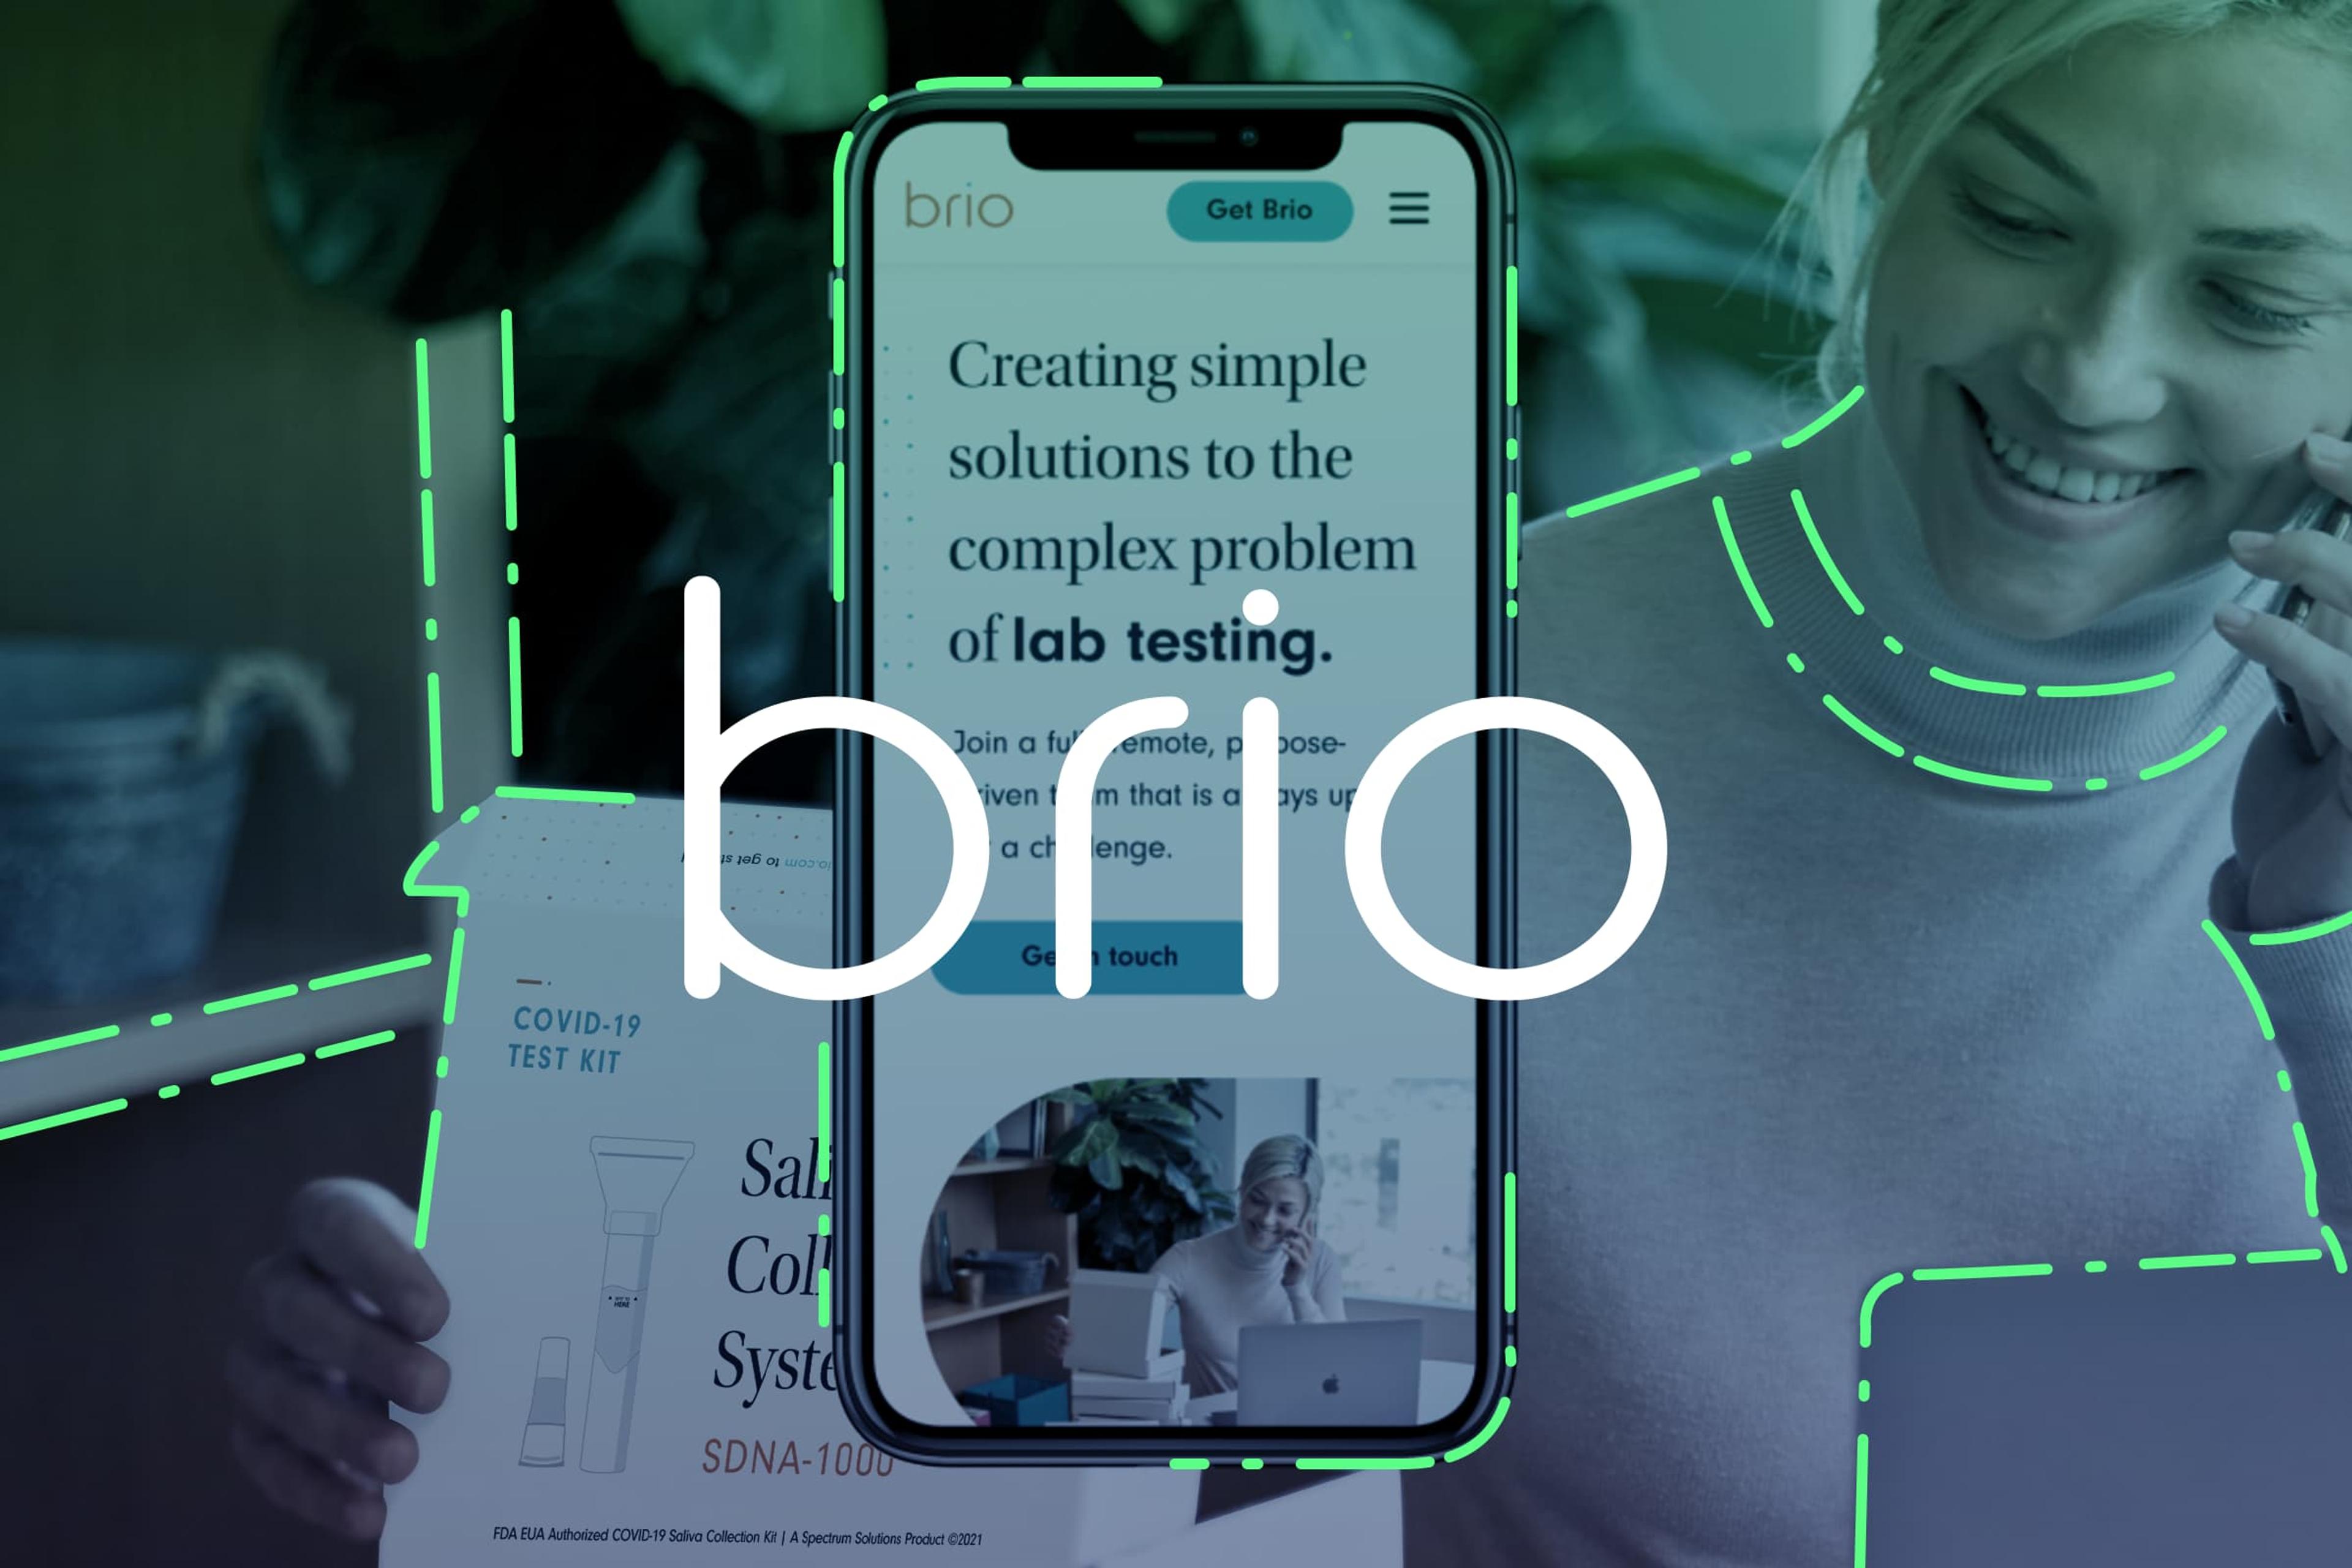 How Brio Pivoted and Scaled During COVID by Making a Smart Bet on Creative